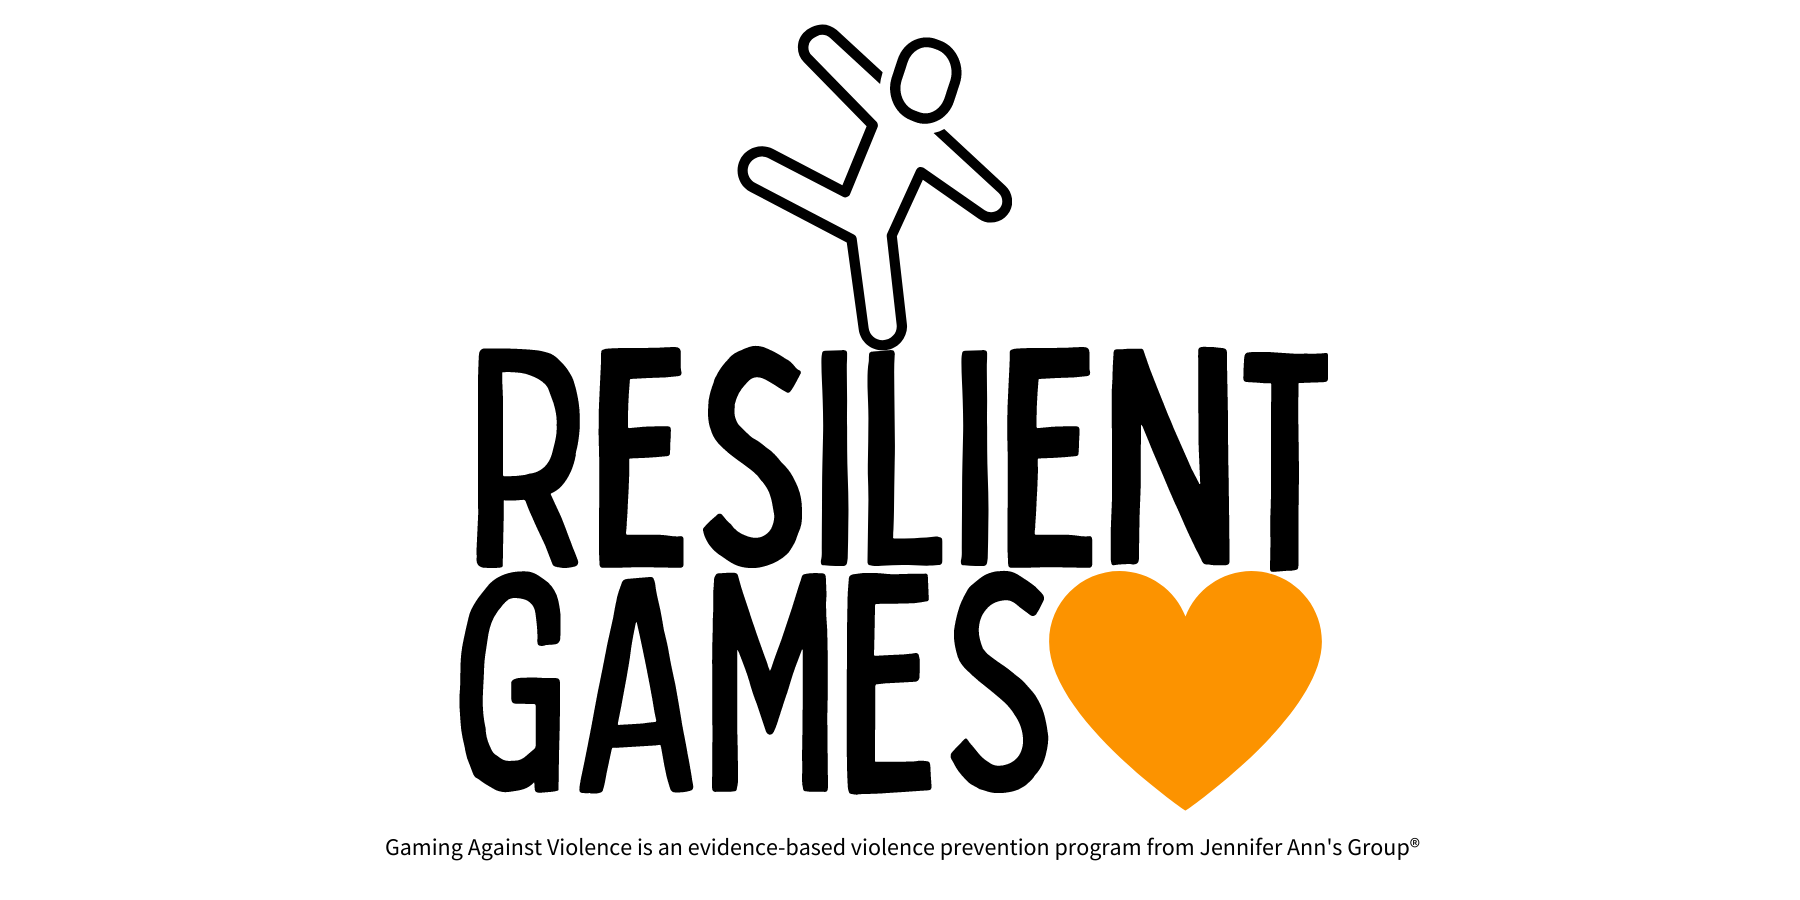 Resilient games. Gaming Against Violence is an evidence-based violence prevention program from Jennifer Ann's Group.